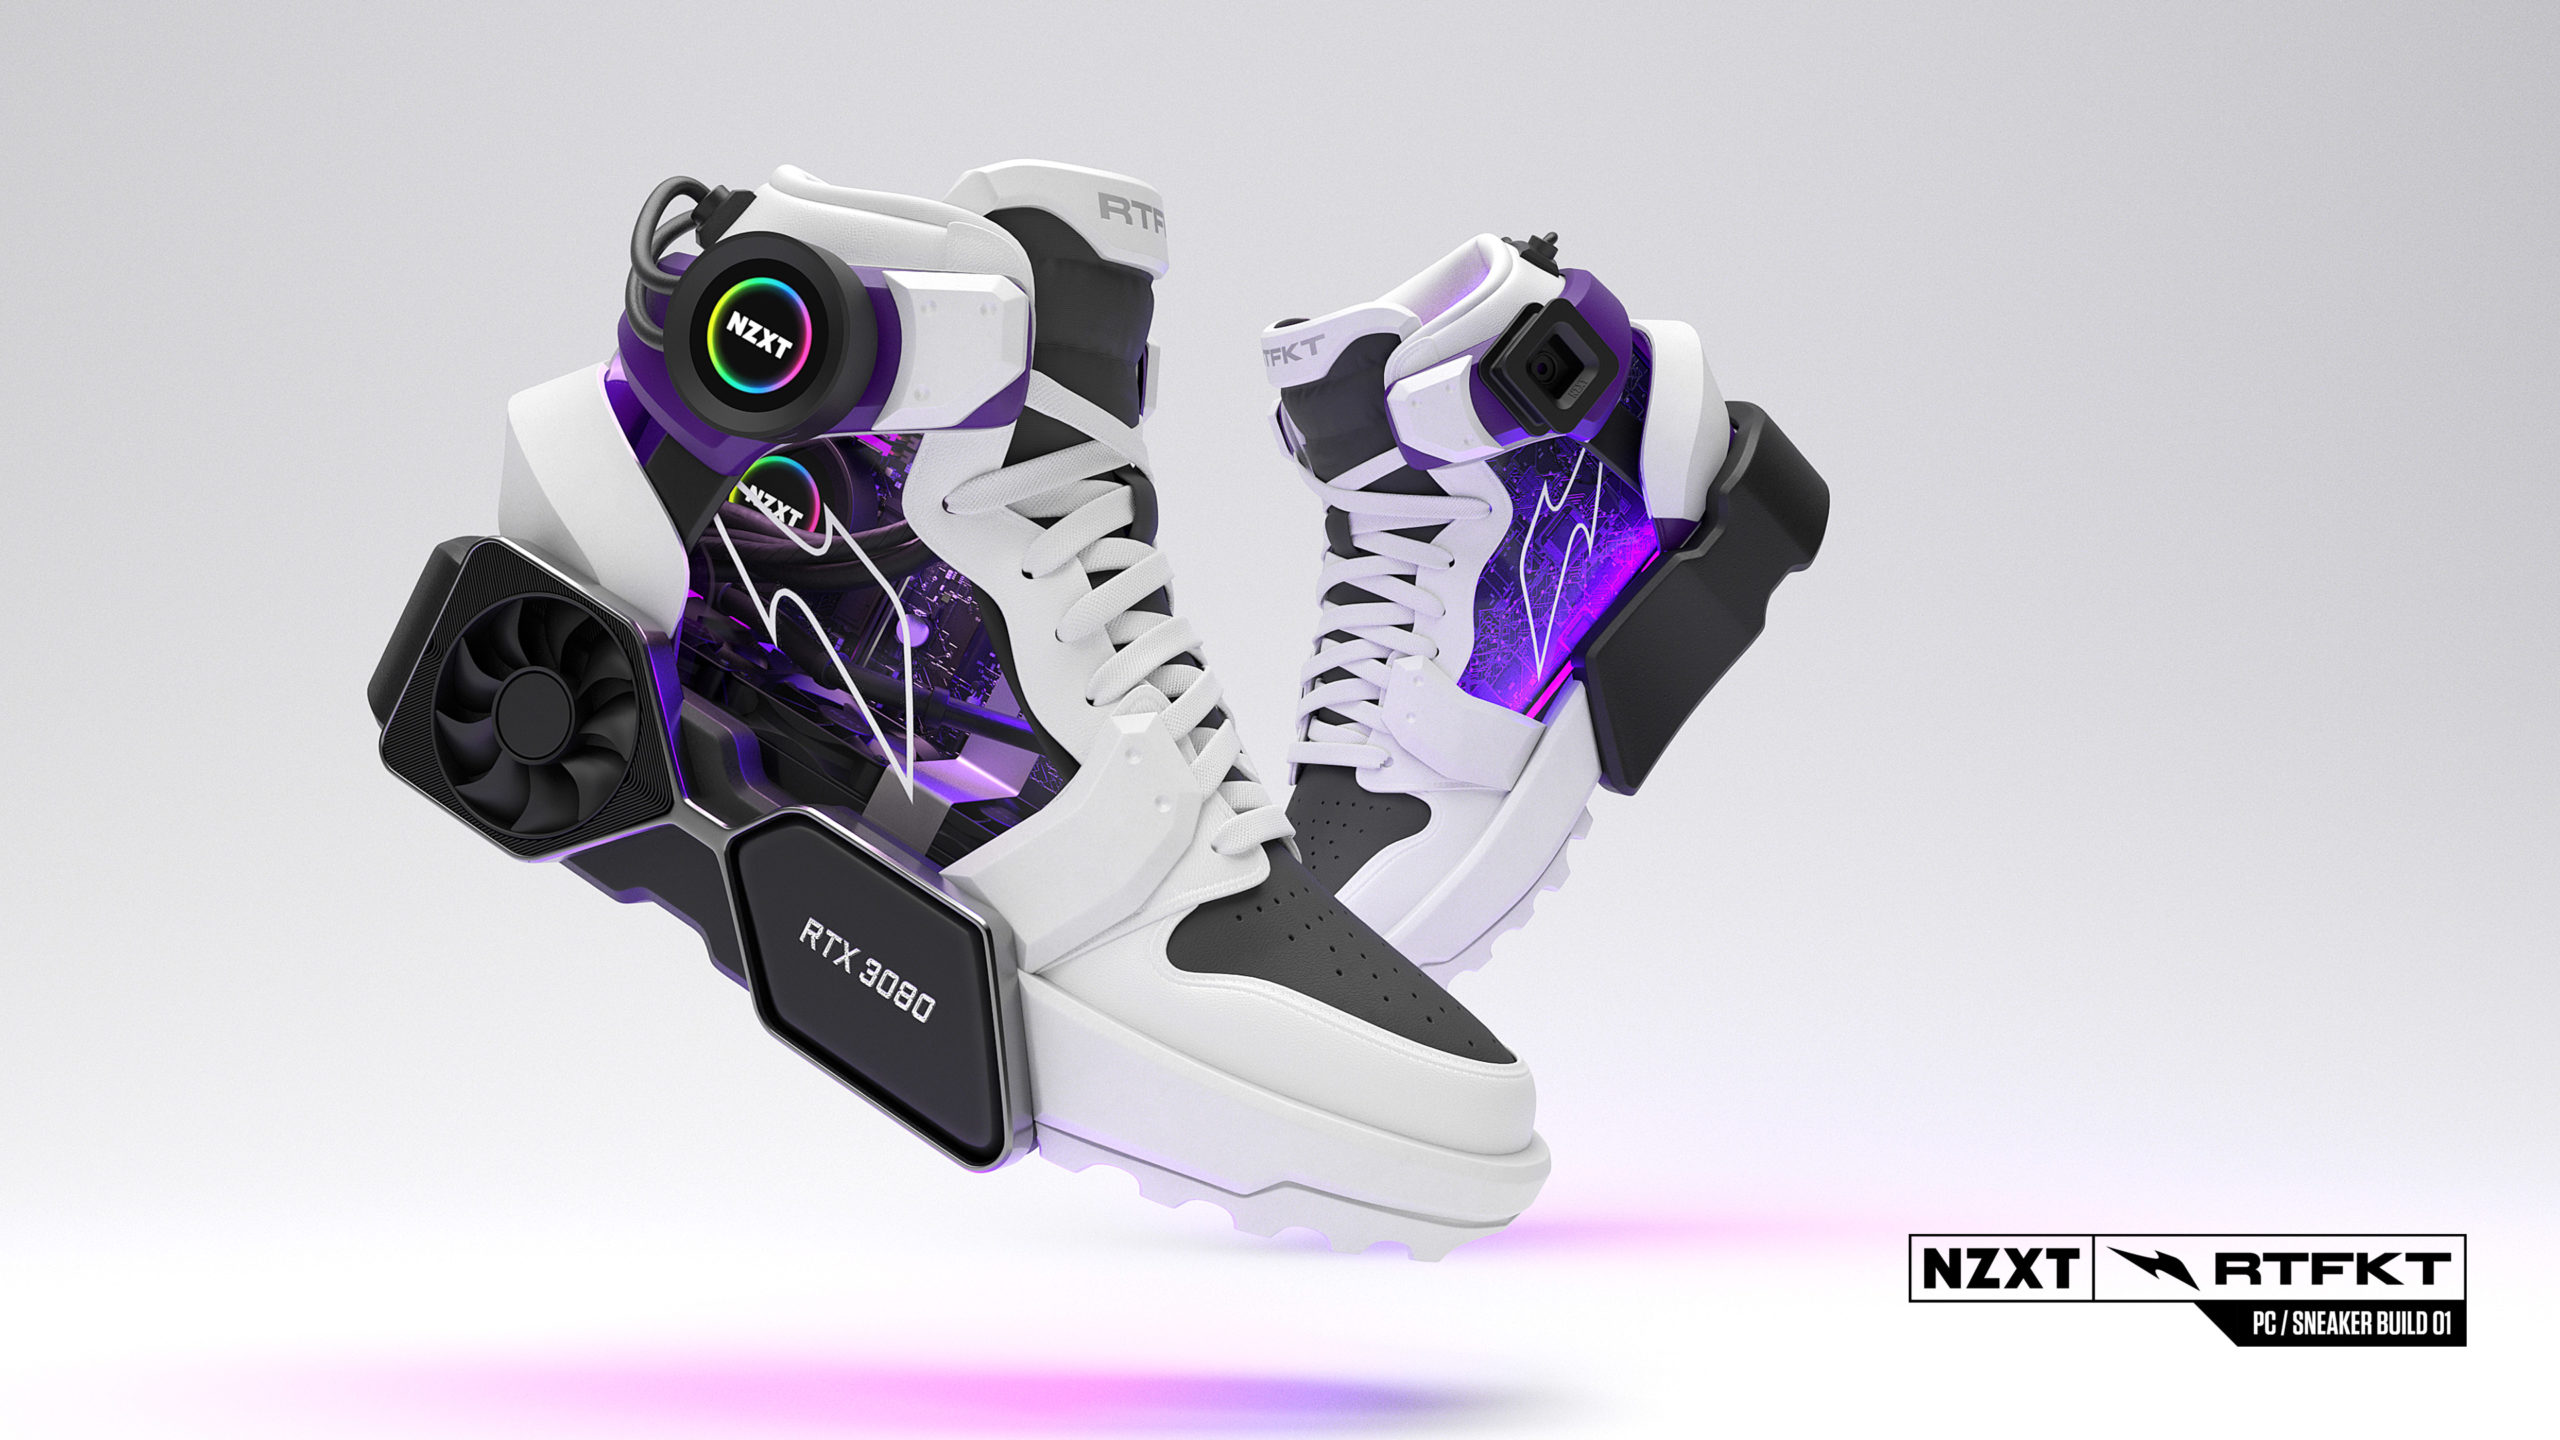 The company sells NFT cybersneakers for $90,000 a pop, attracting an $8.2 million investment round led by Andreesen Horowitz